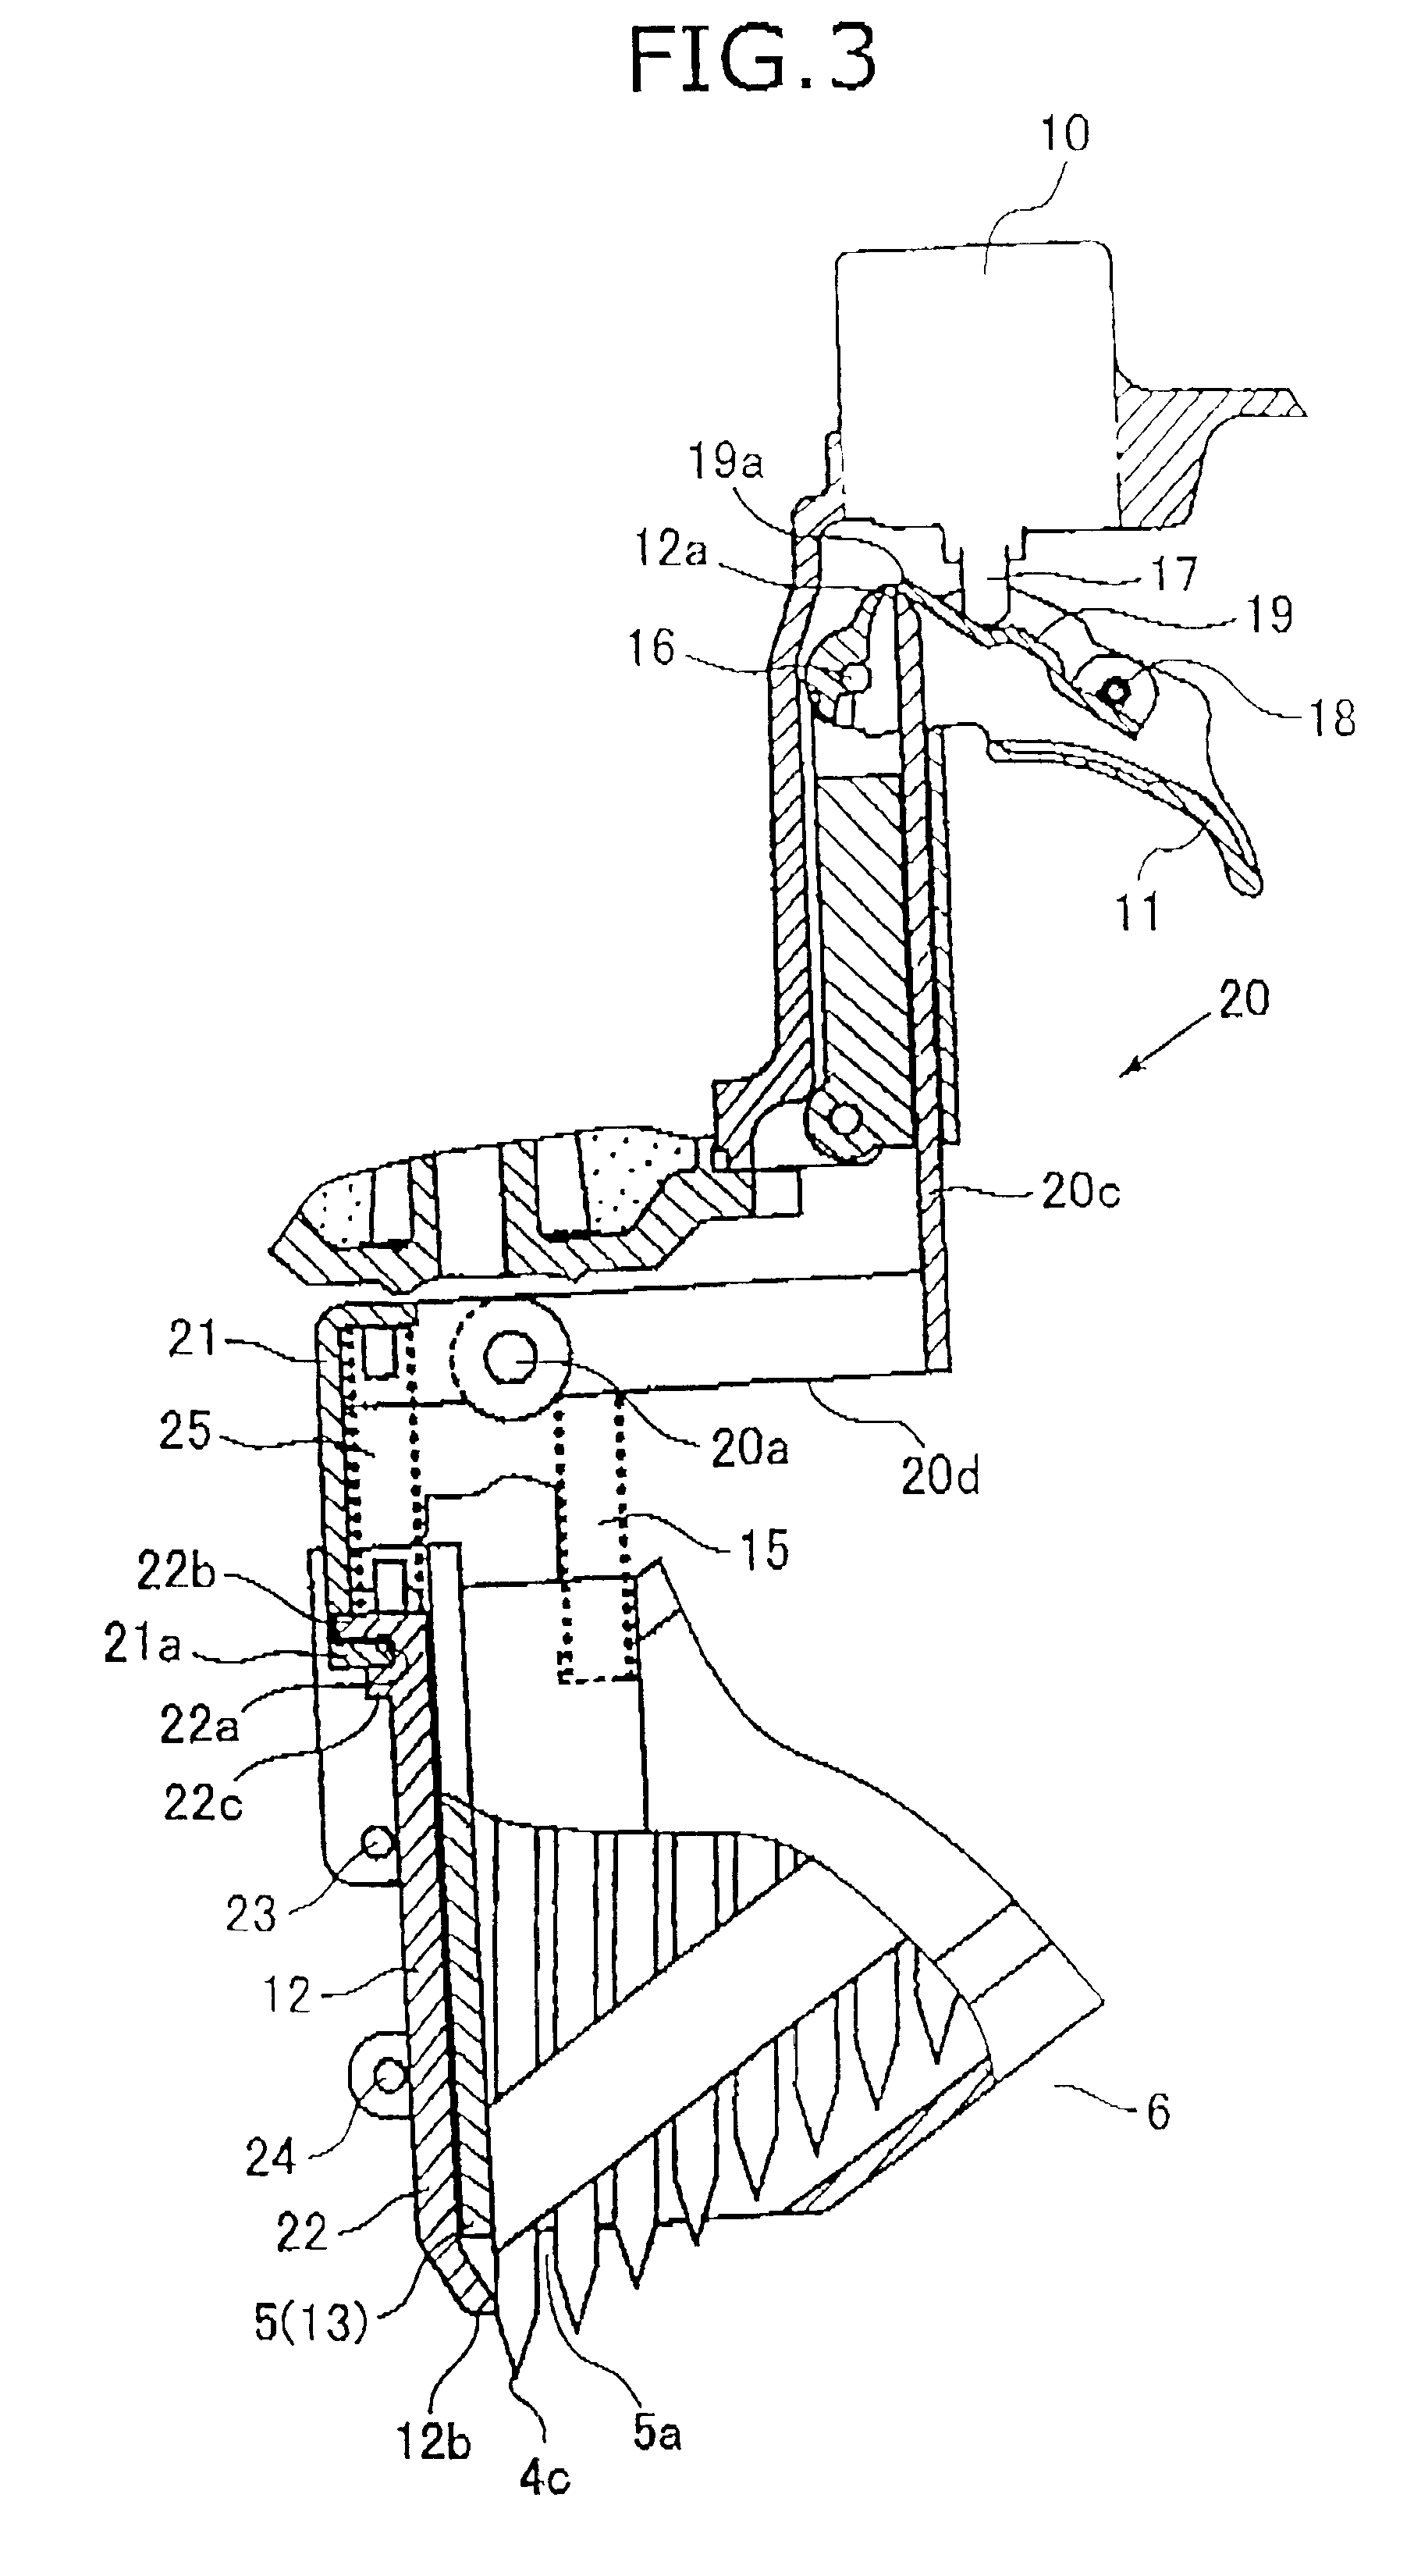 Nail gun with safety portion mechanism for preventing misfires